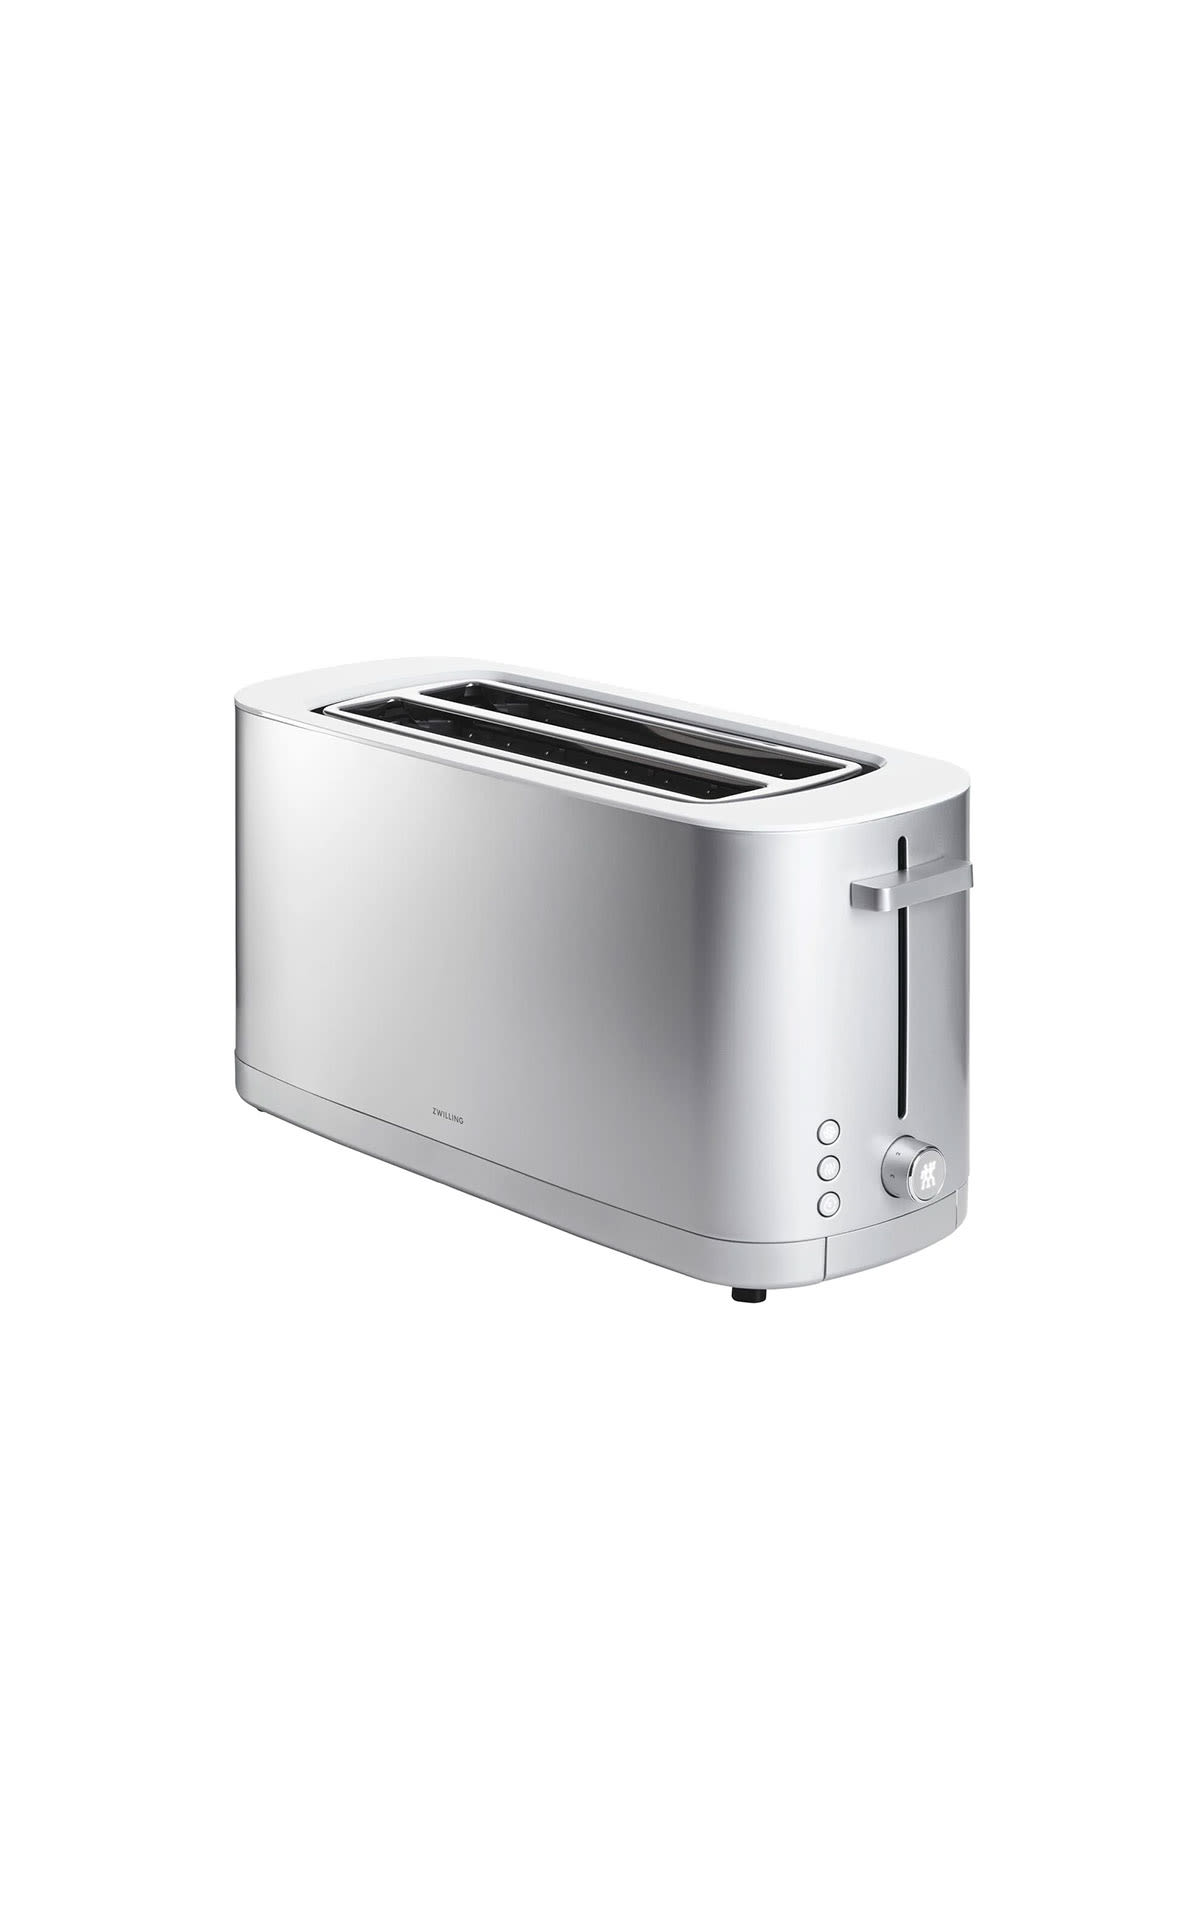 Zwilling 2 long slots toaster from Bicester Village